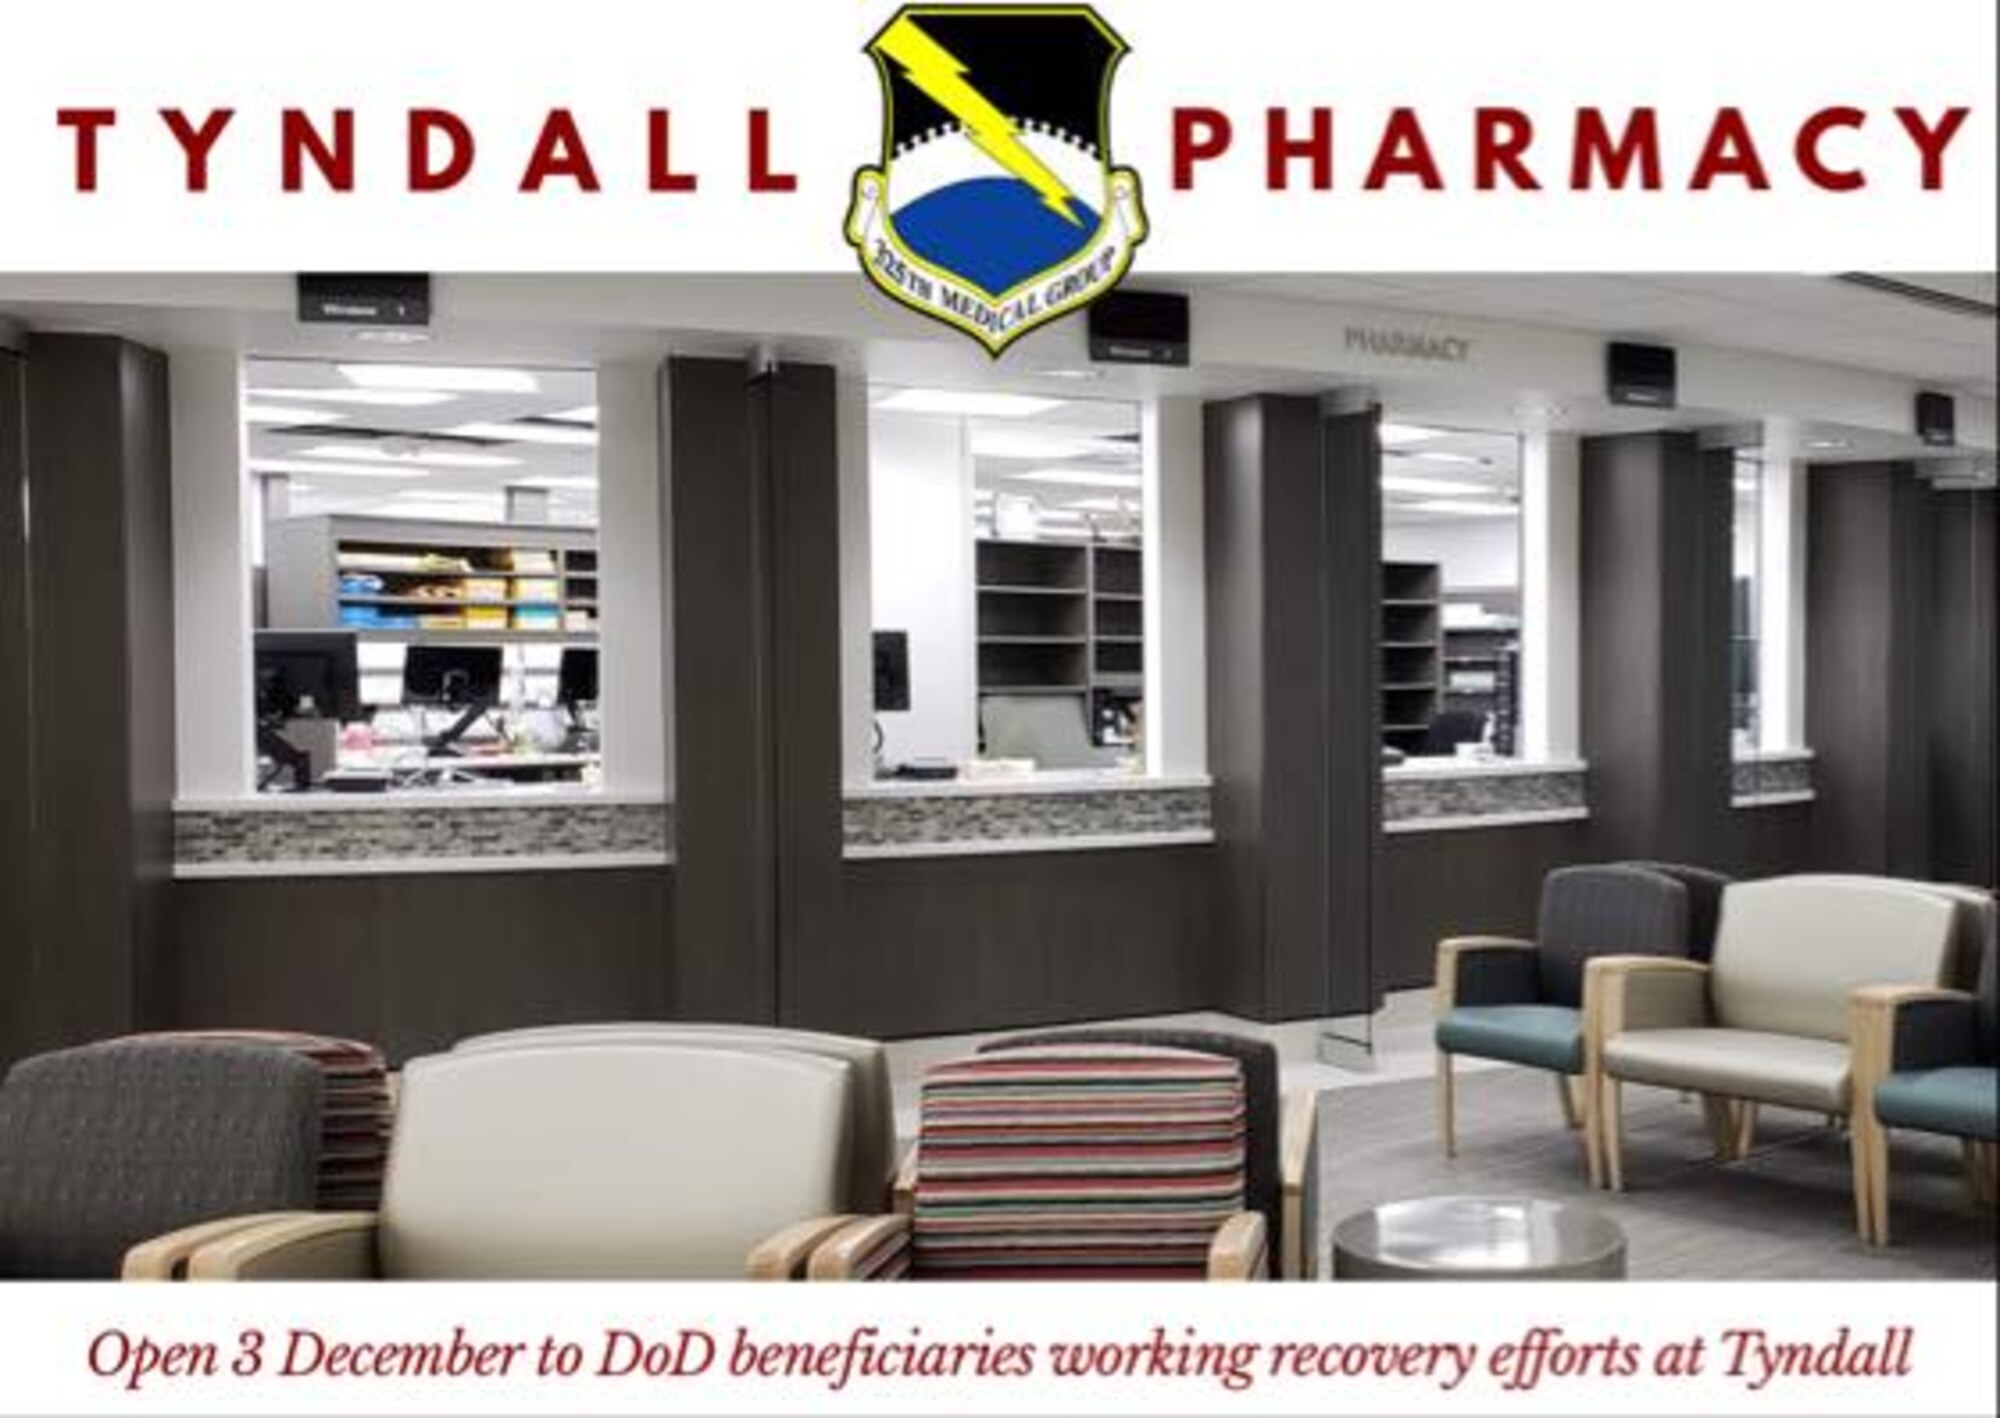 Open 3 December to DOD beneficiaries working recovery efforts at Tyndall